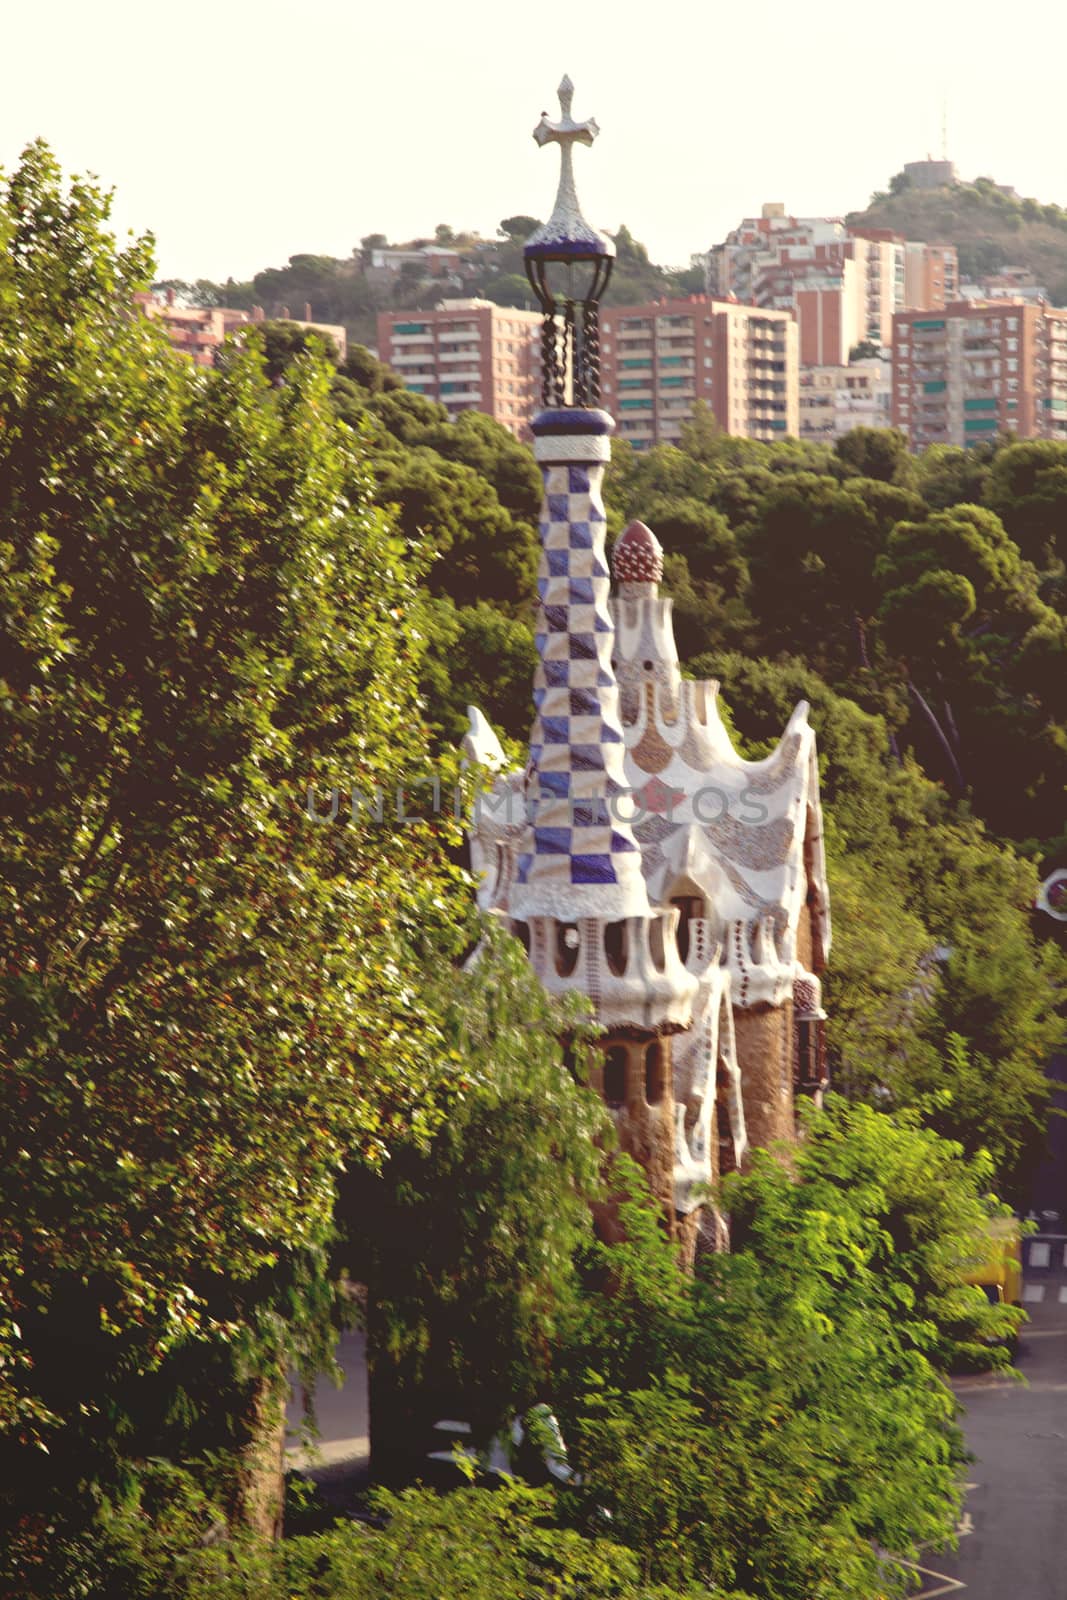 Frame ceramic tile Gingerbread house covered with tile-shard mosaic, Parc Guell designed by Antoni Gaudi located on Carmel Hill, Barcelona, Spain.